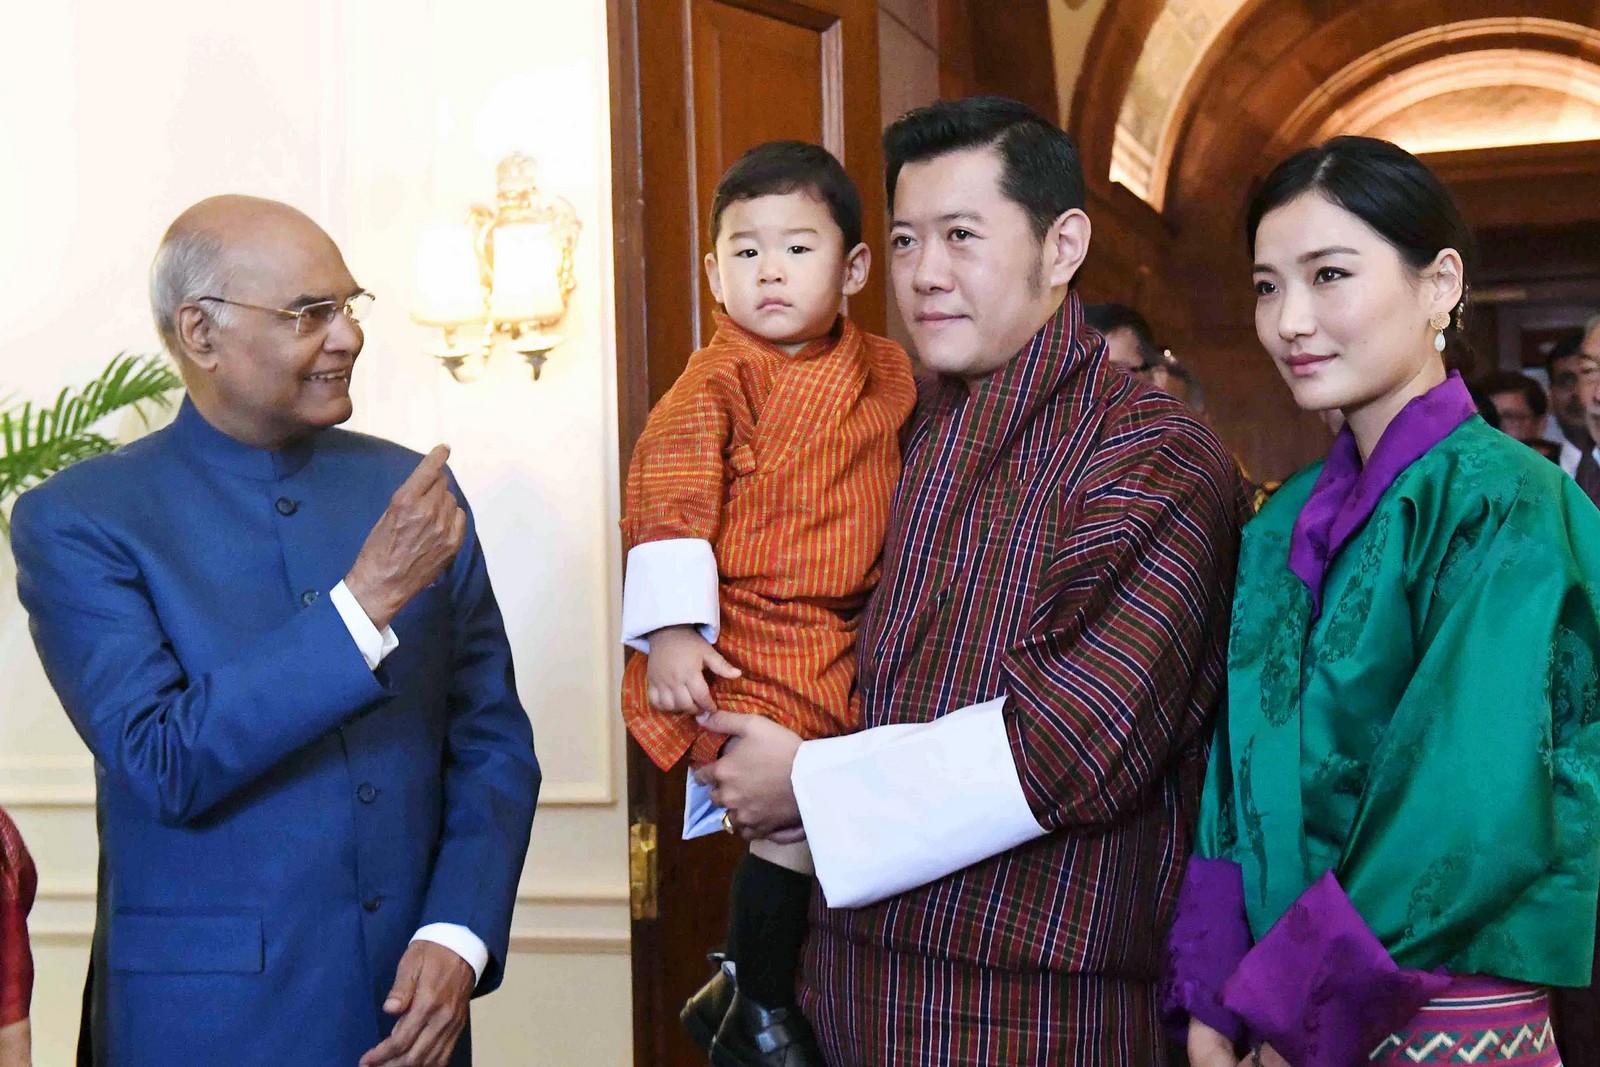 Bhutan's royal family is in India and the Crown Prince is winning